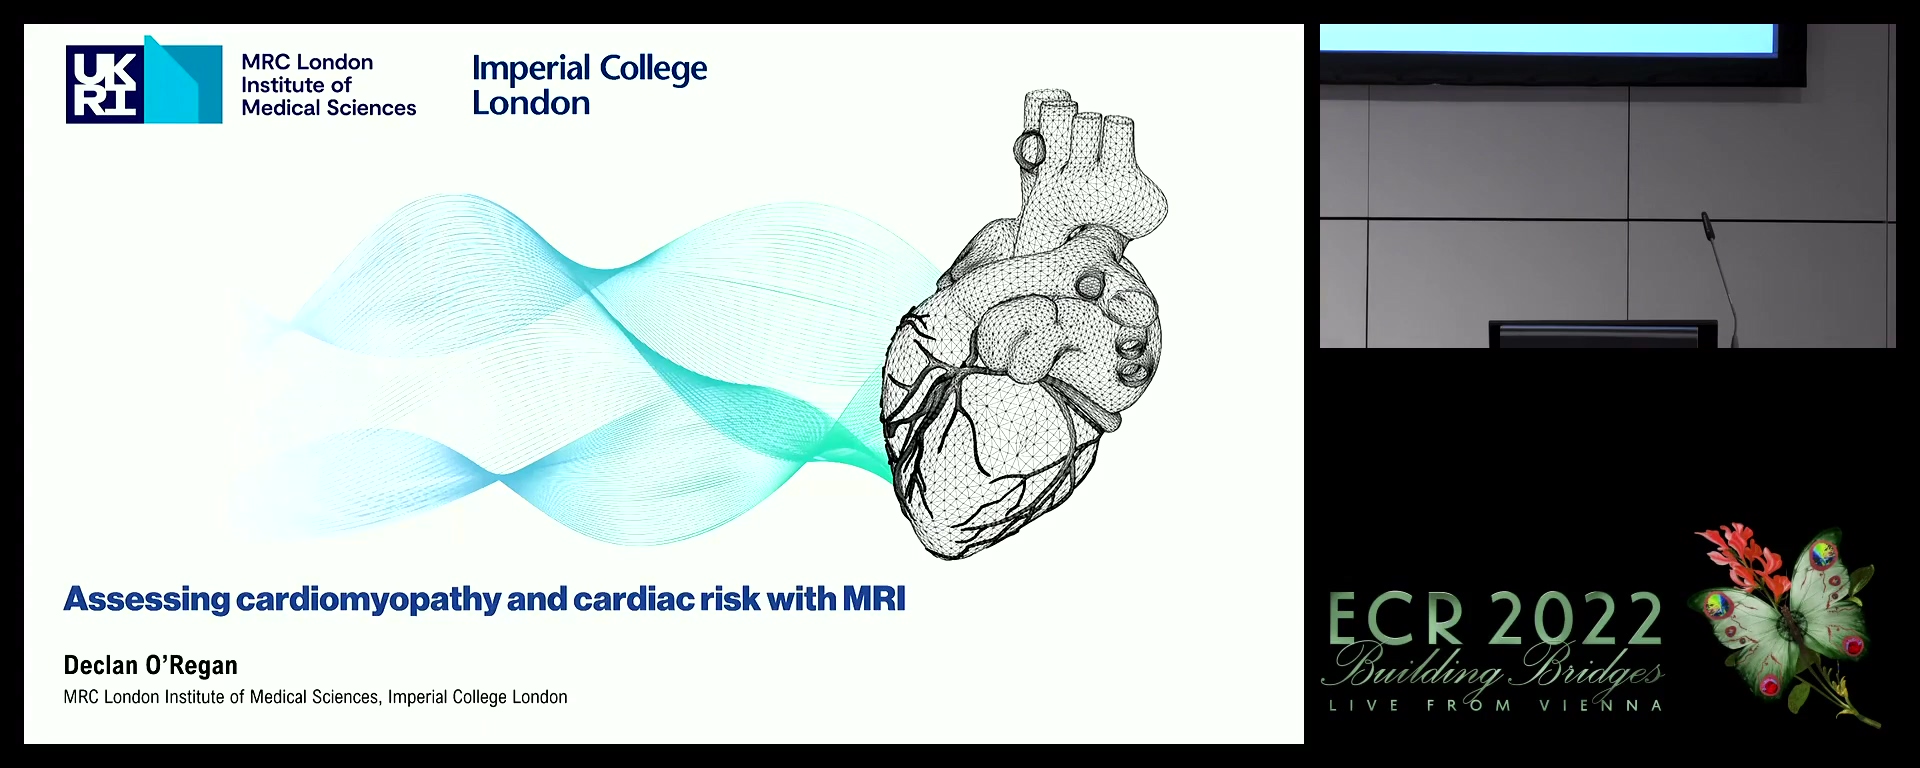 Assessing cardiomyopathy and cardiac risk with MRI